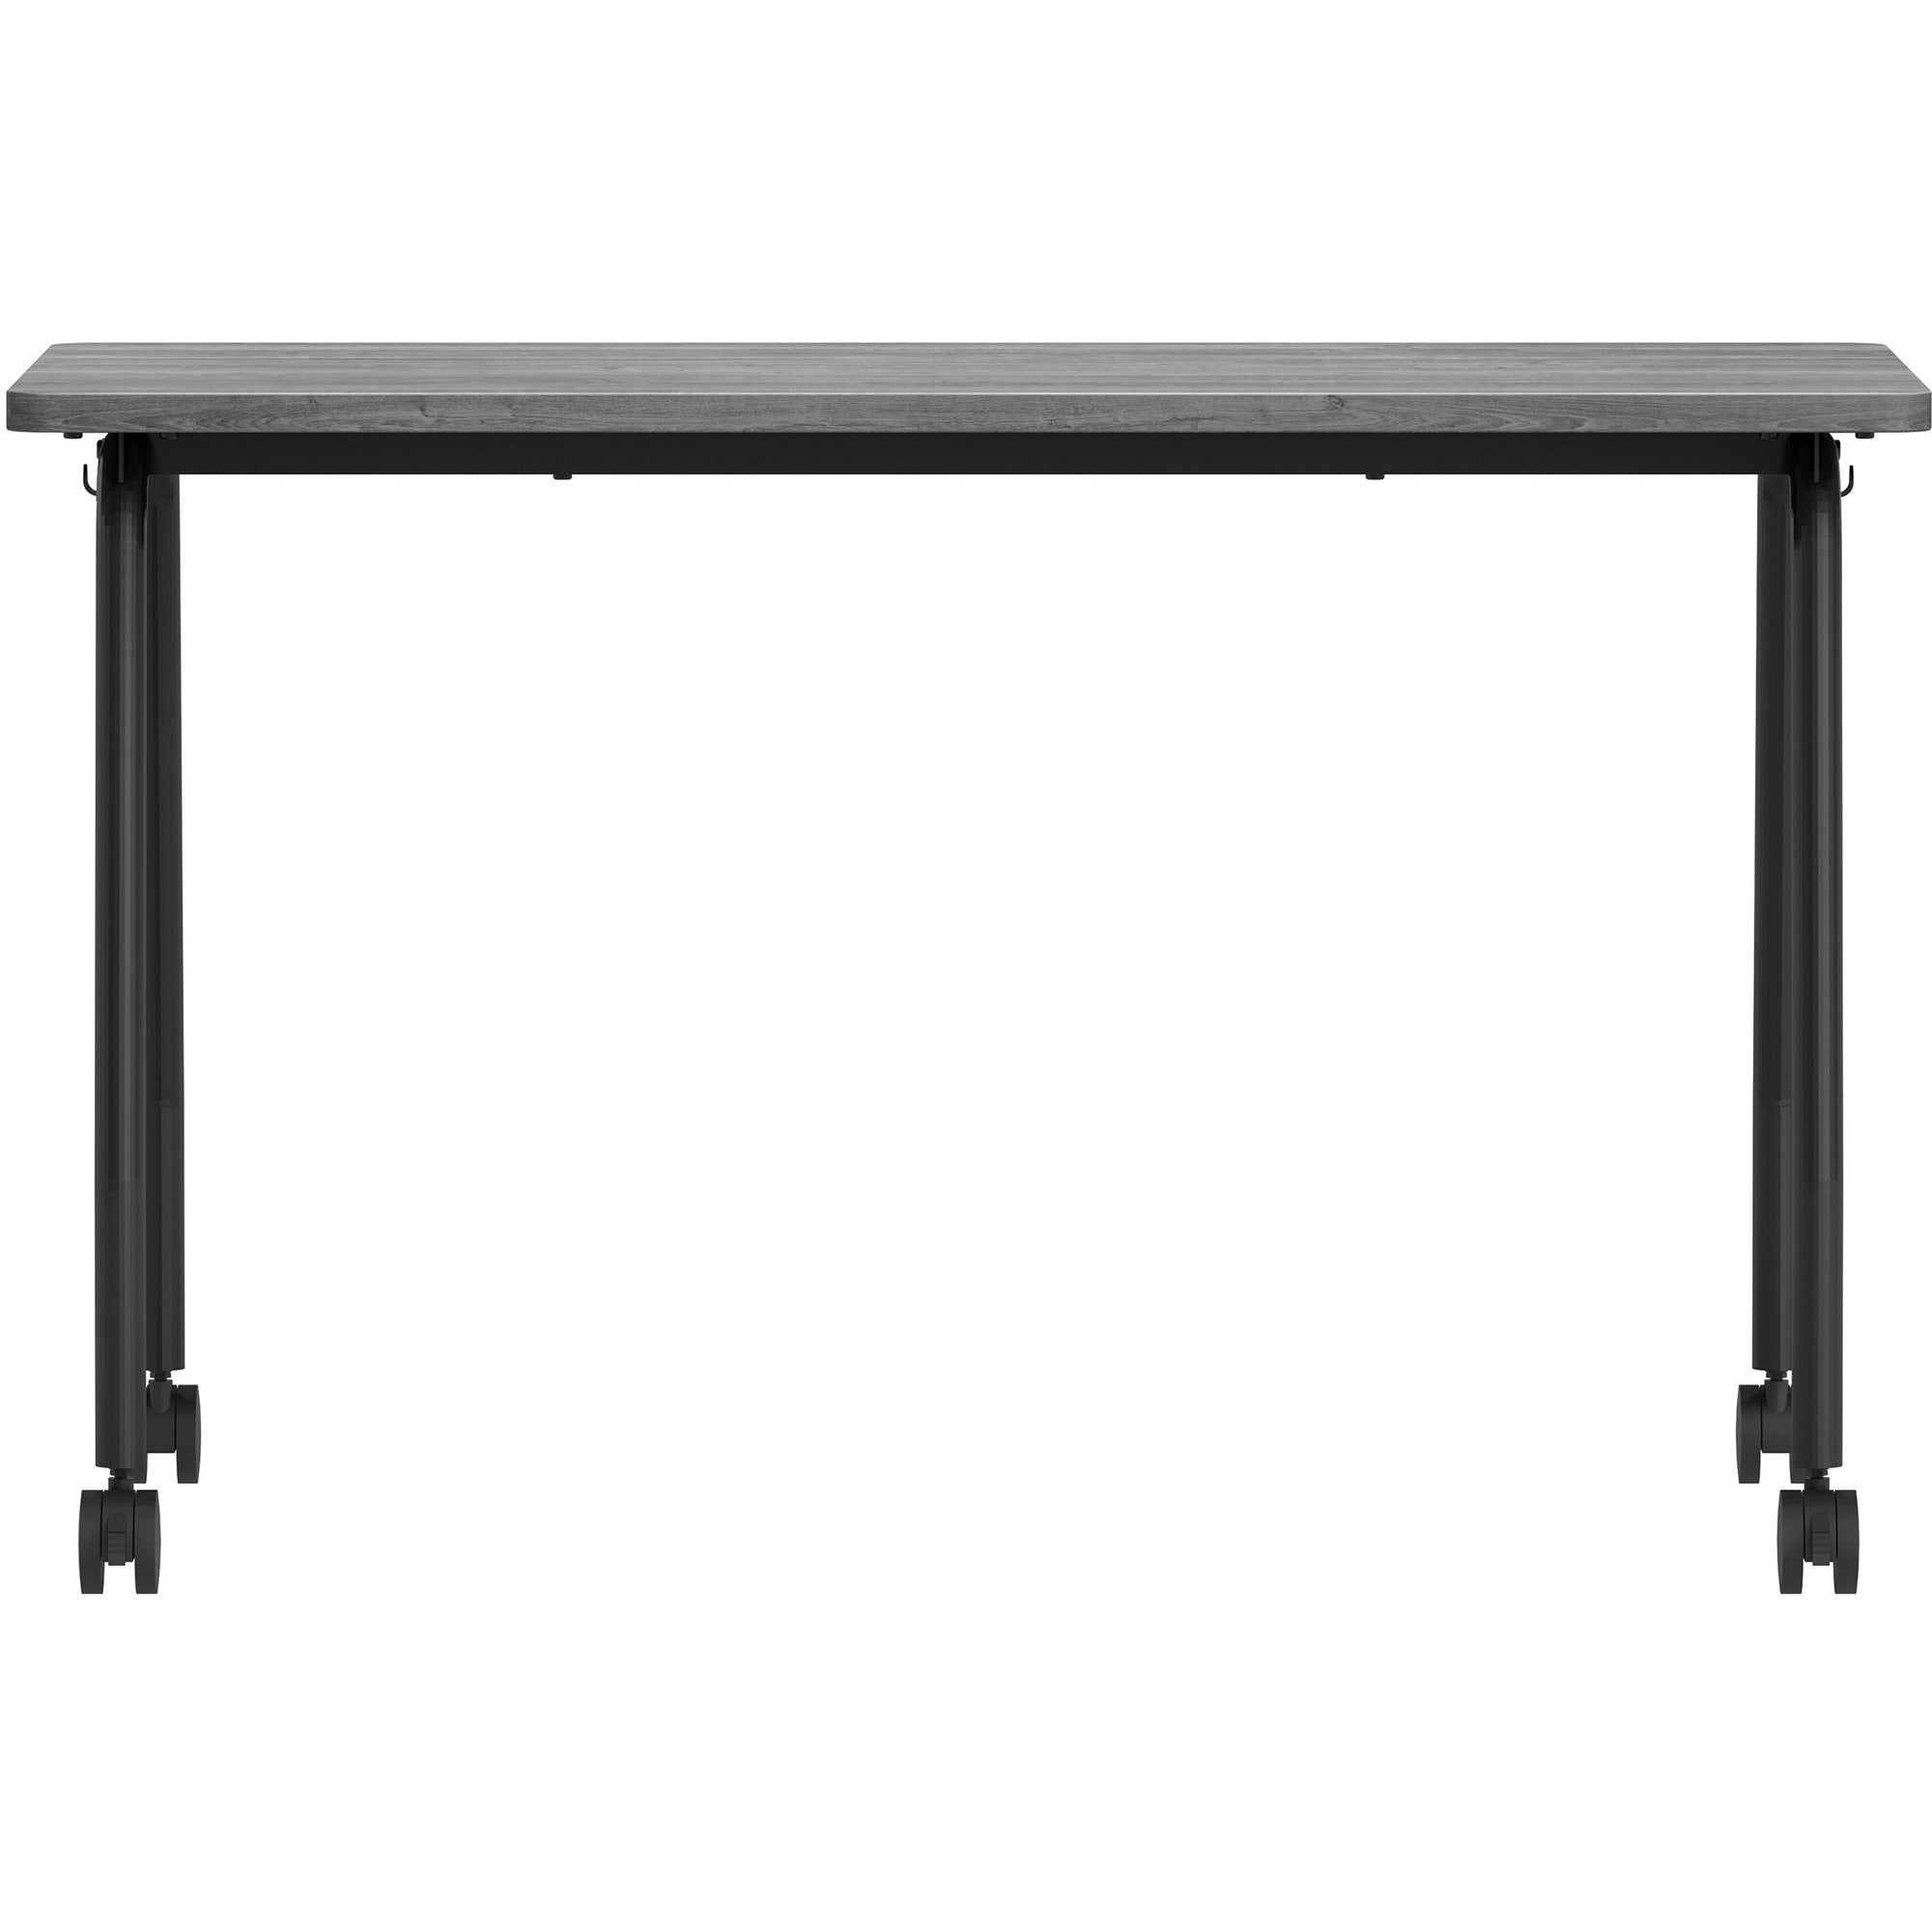 Lorell Training Table - For - Table TopLaminated Top - 300 lb Capacity - 29.50" Table Top Length x 23.63" Table Top Width x 1" Table Top Thickness - 47.25" Height - Assembly Required - Weathered Charcoal - Particleboard Top Material - 1 Each - 3